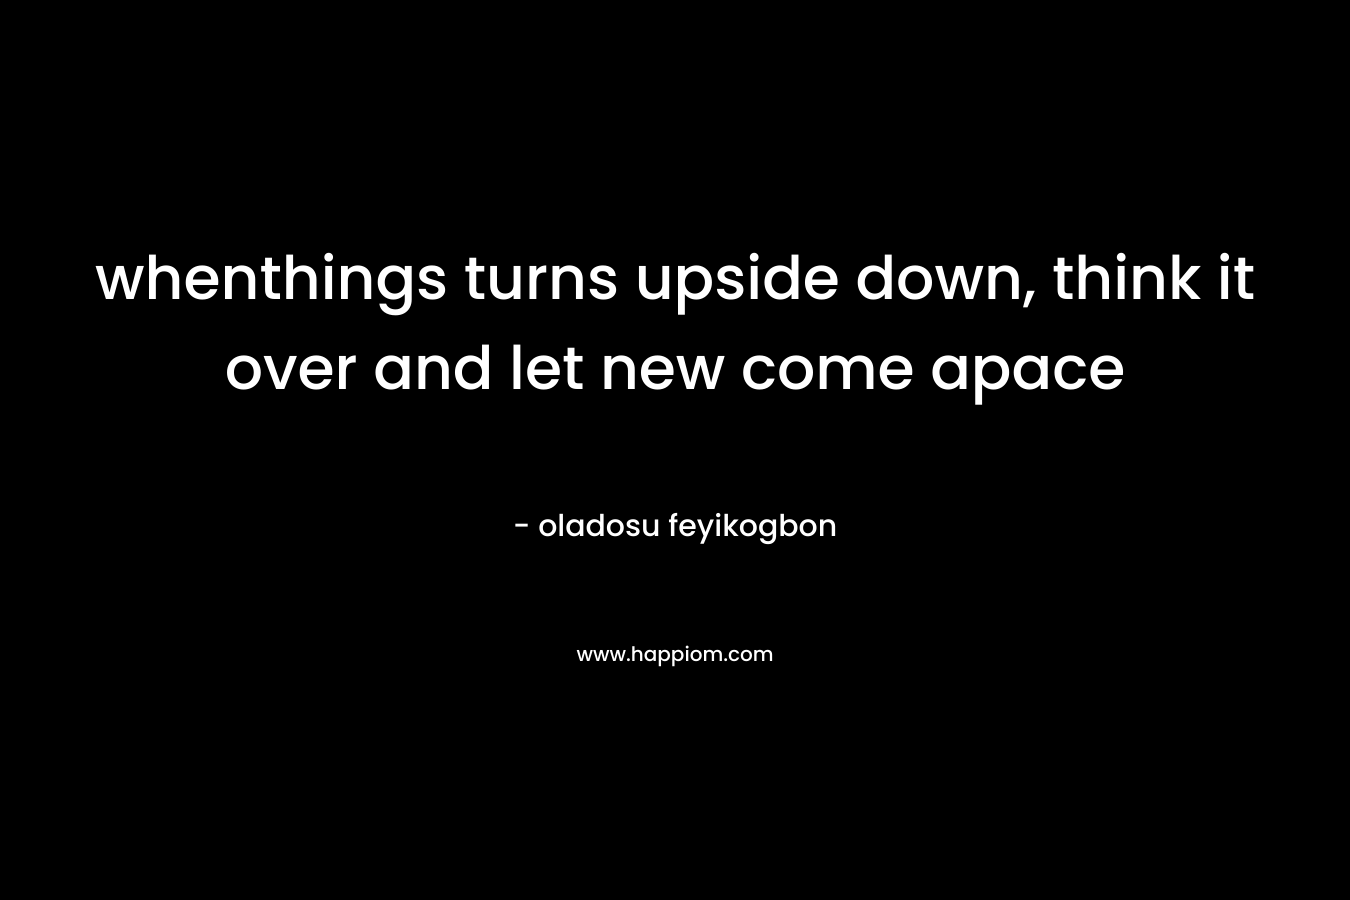 whenthings turns upside down, think it over and let new come apace